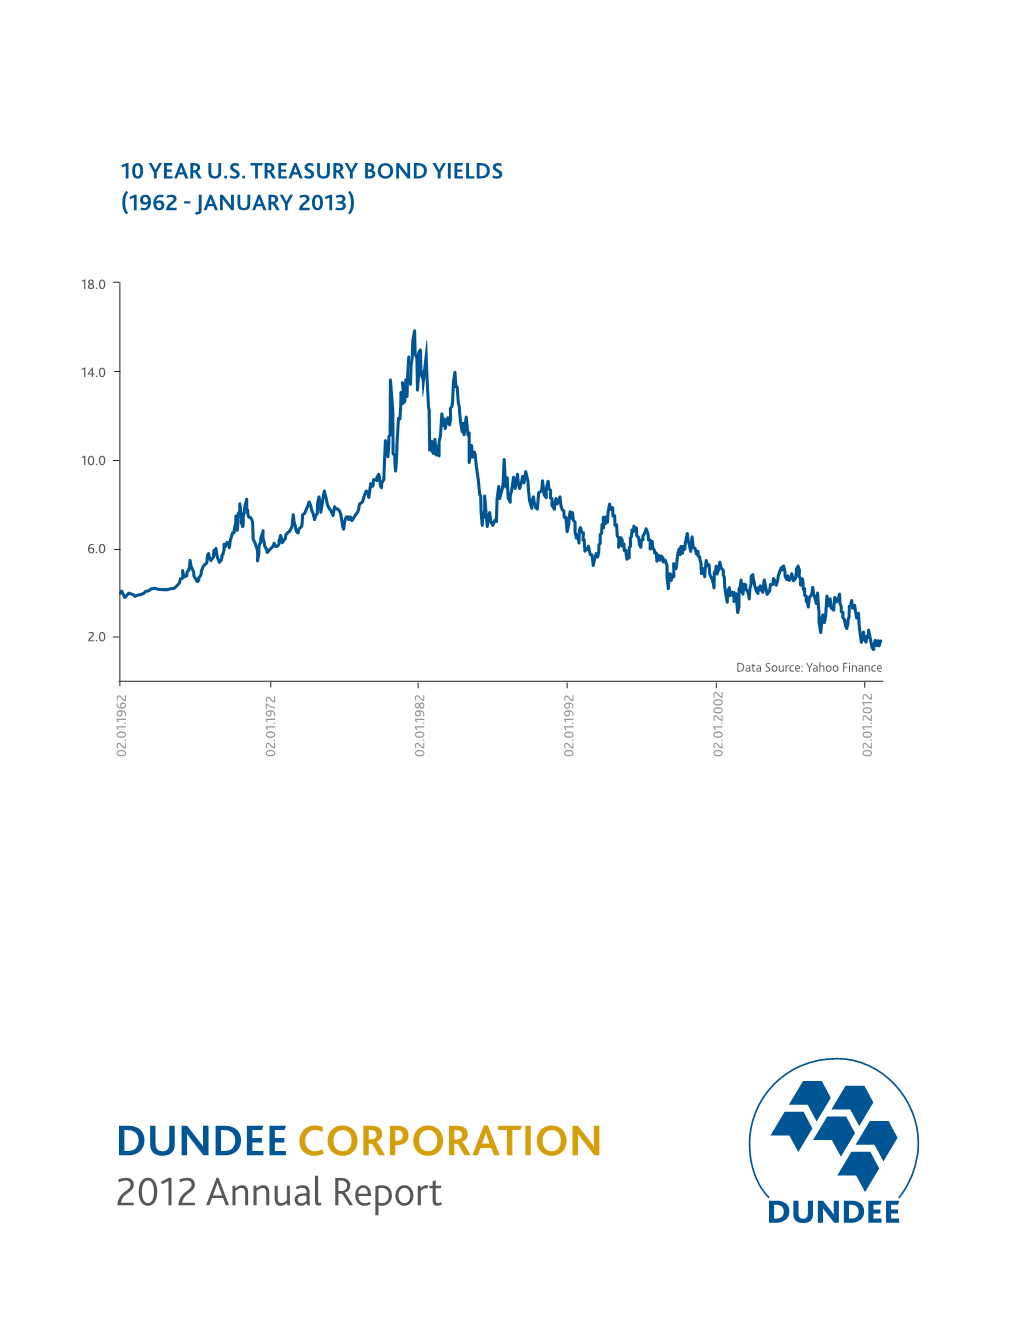 DUNDEE CORPORATION 2012 Annual Report